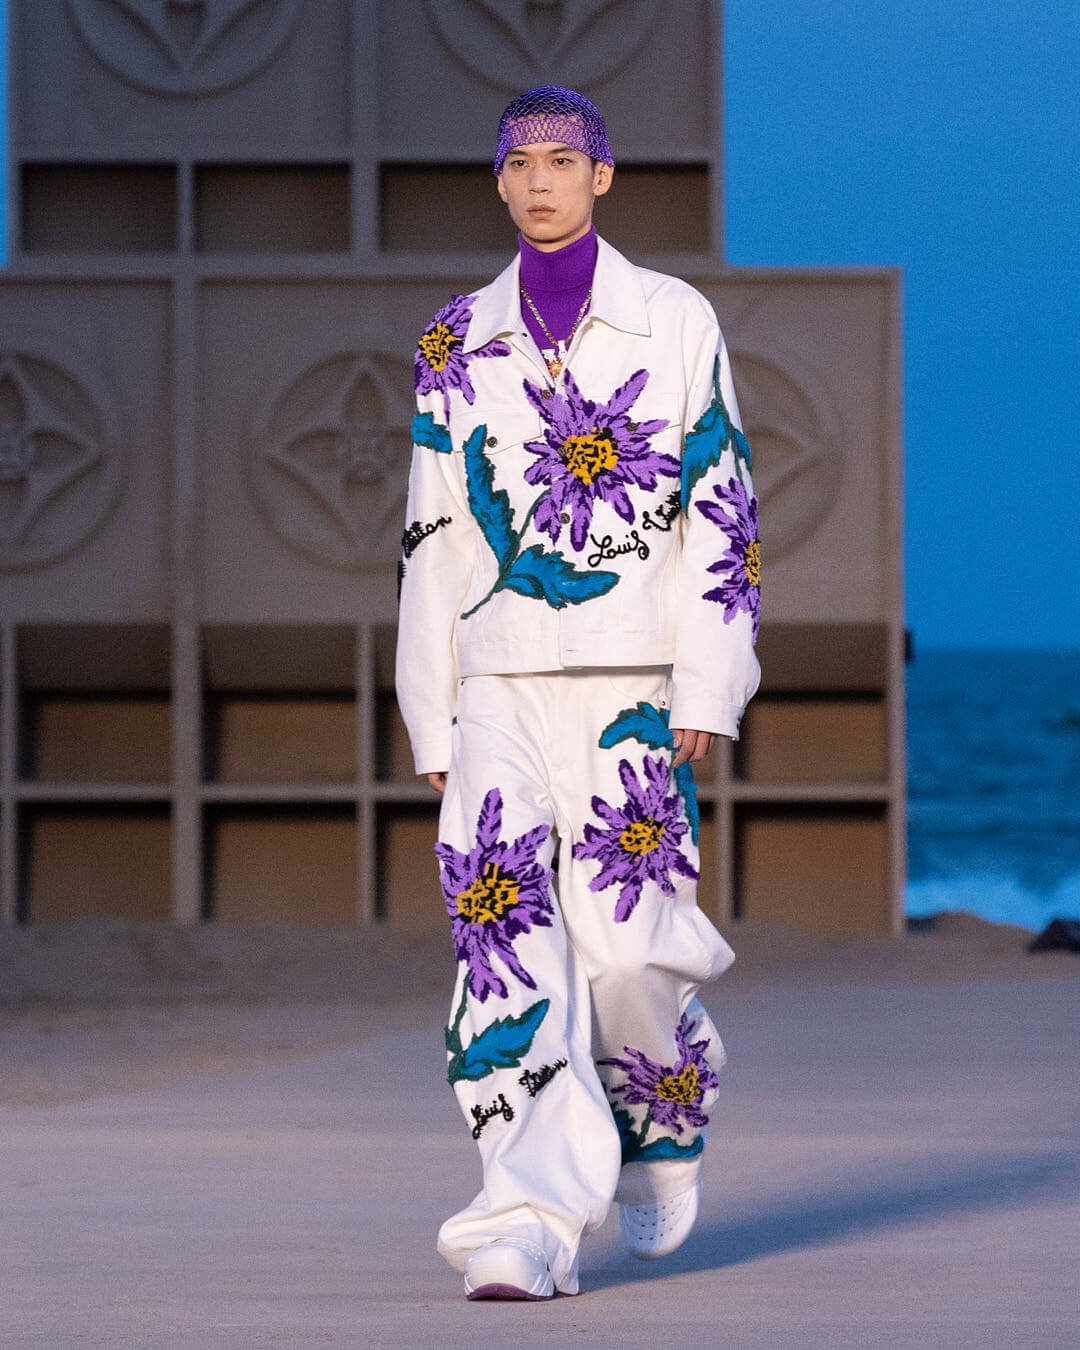 Louis Vuitton Presents its Men's Spring/Summer 2022 Spin-off Fashion Show  in Aranya, China